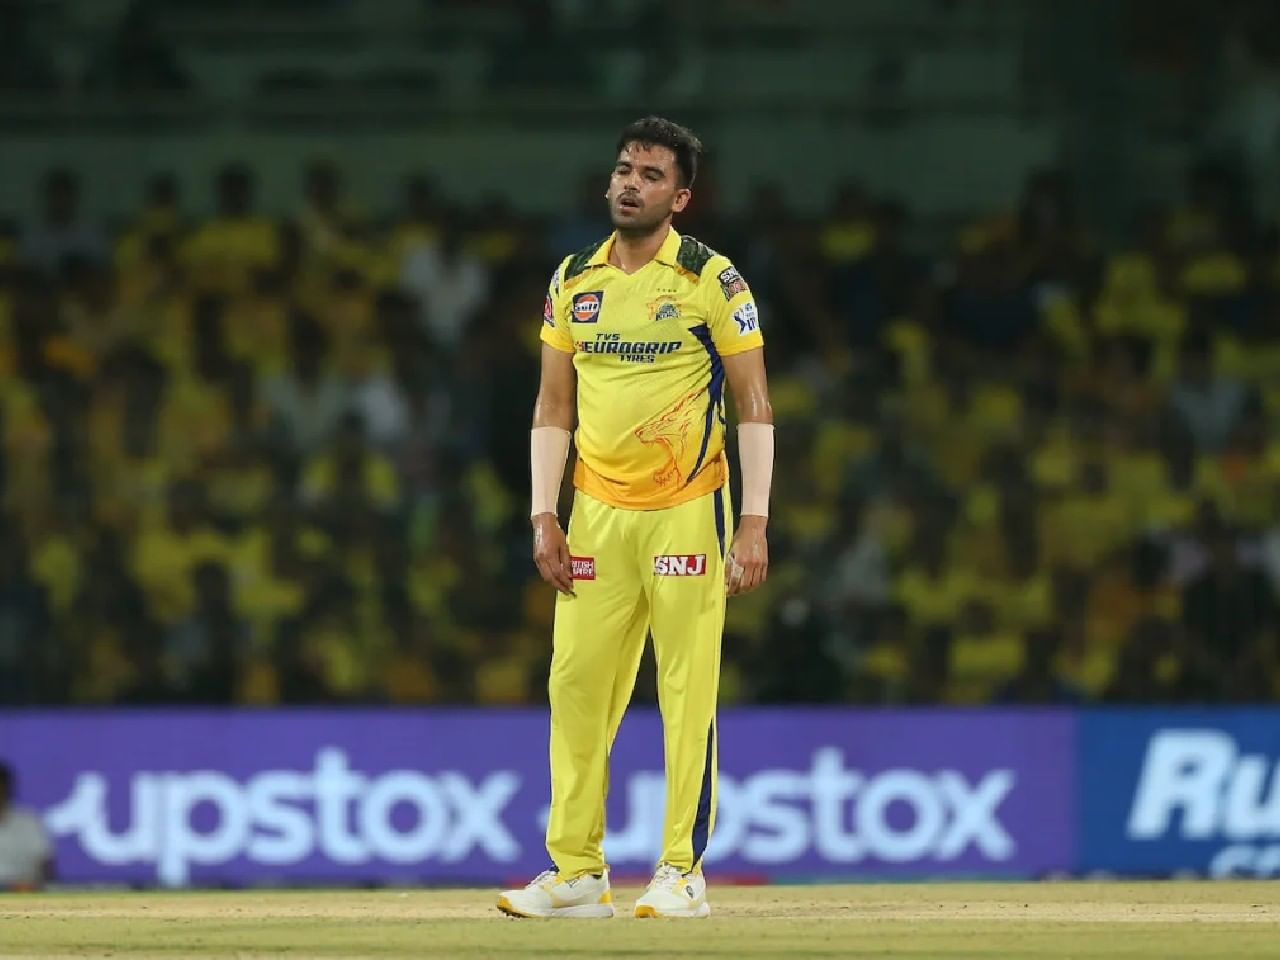 Watch video: Chennai Super Kings pacer Deepak Chahar returns to training after suffering hamstring injury